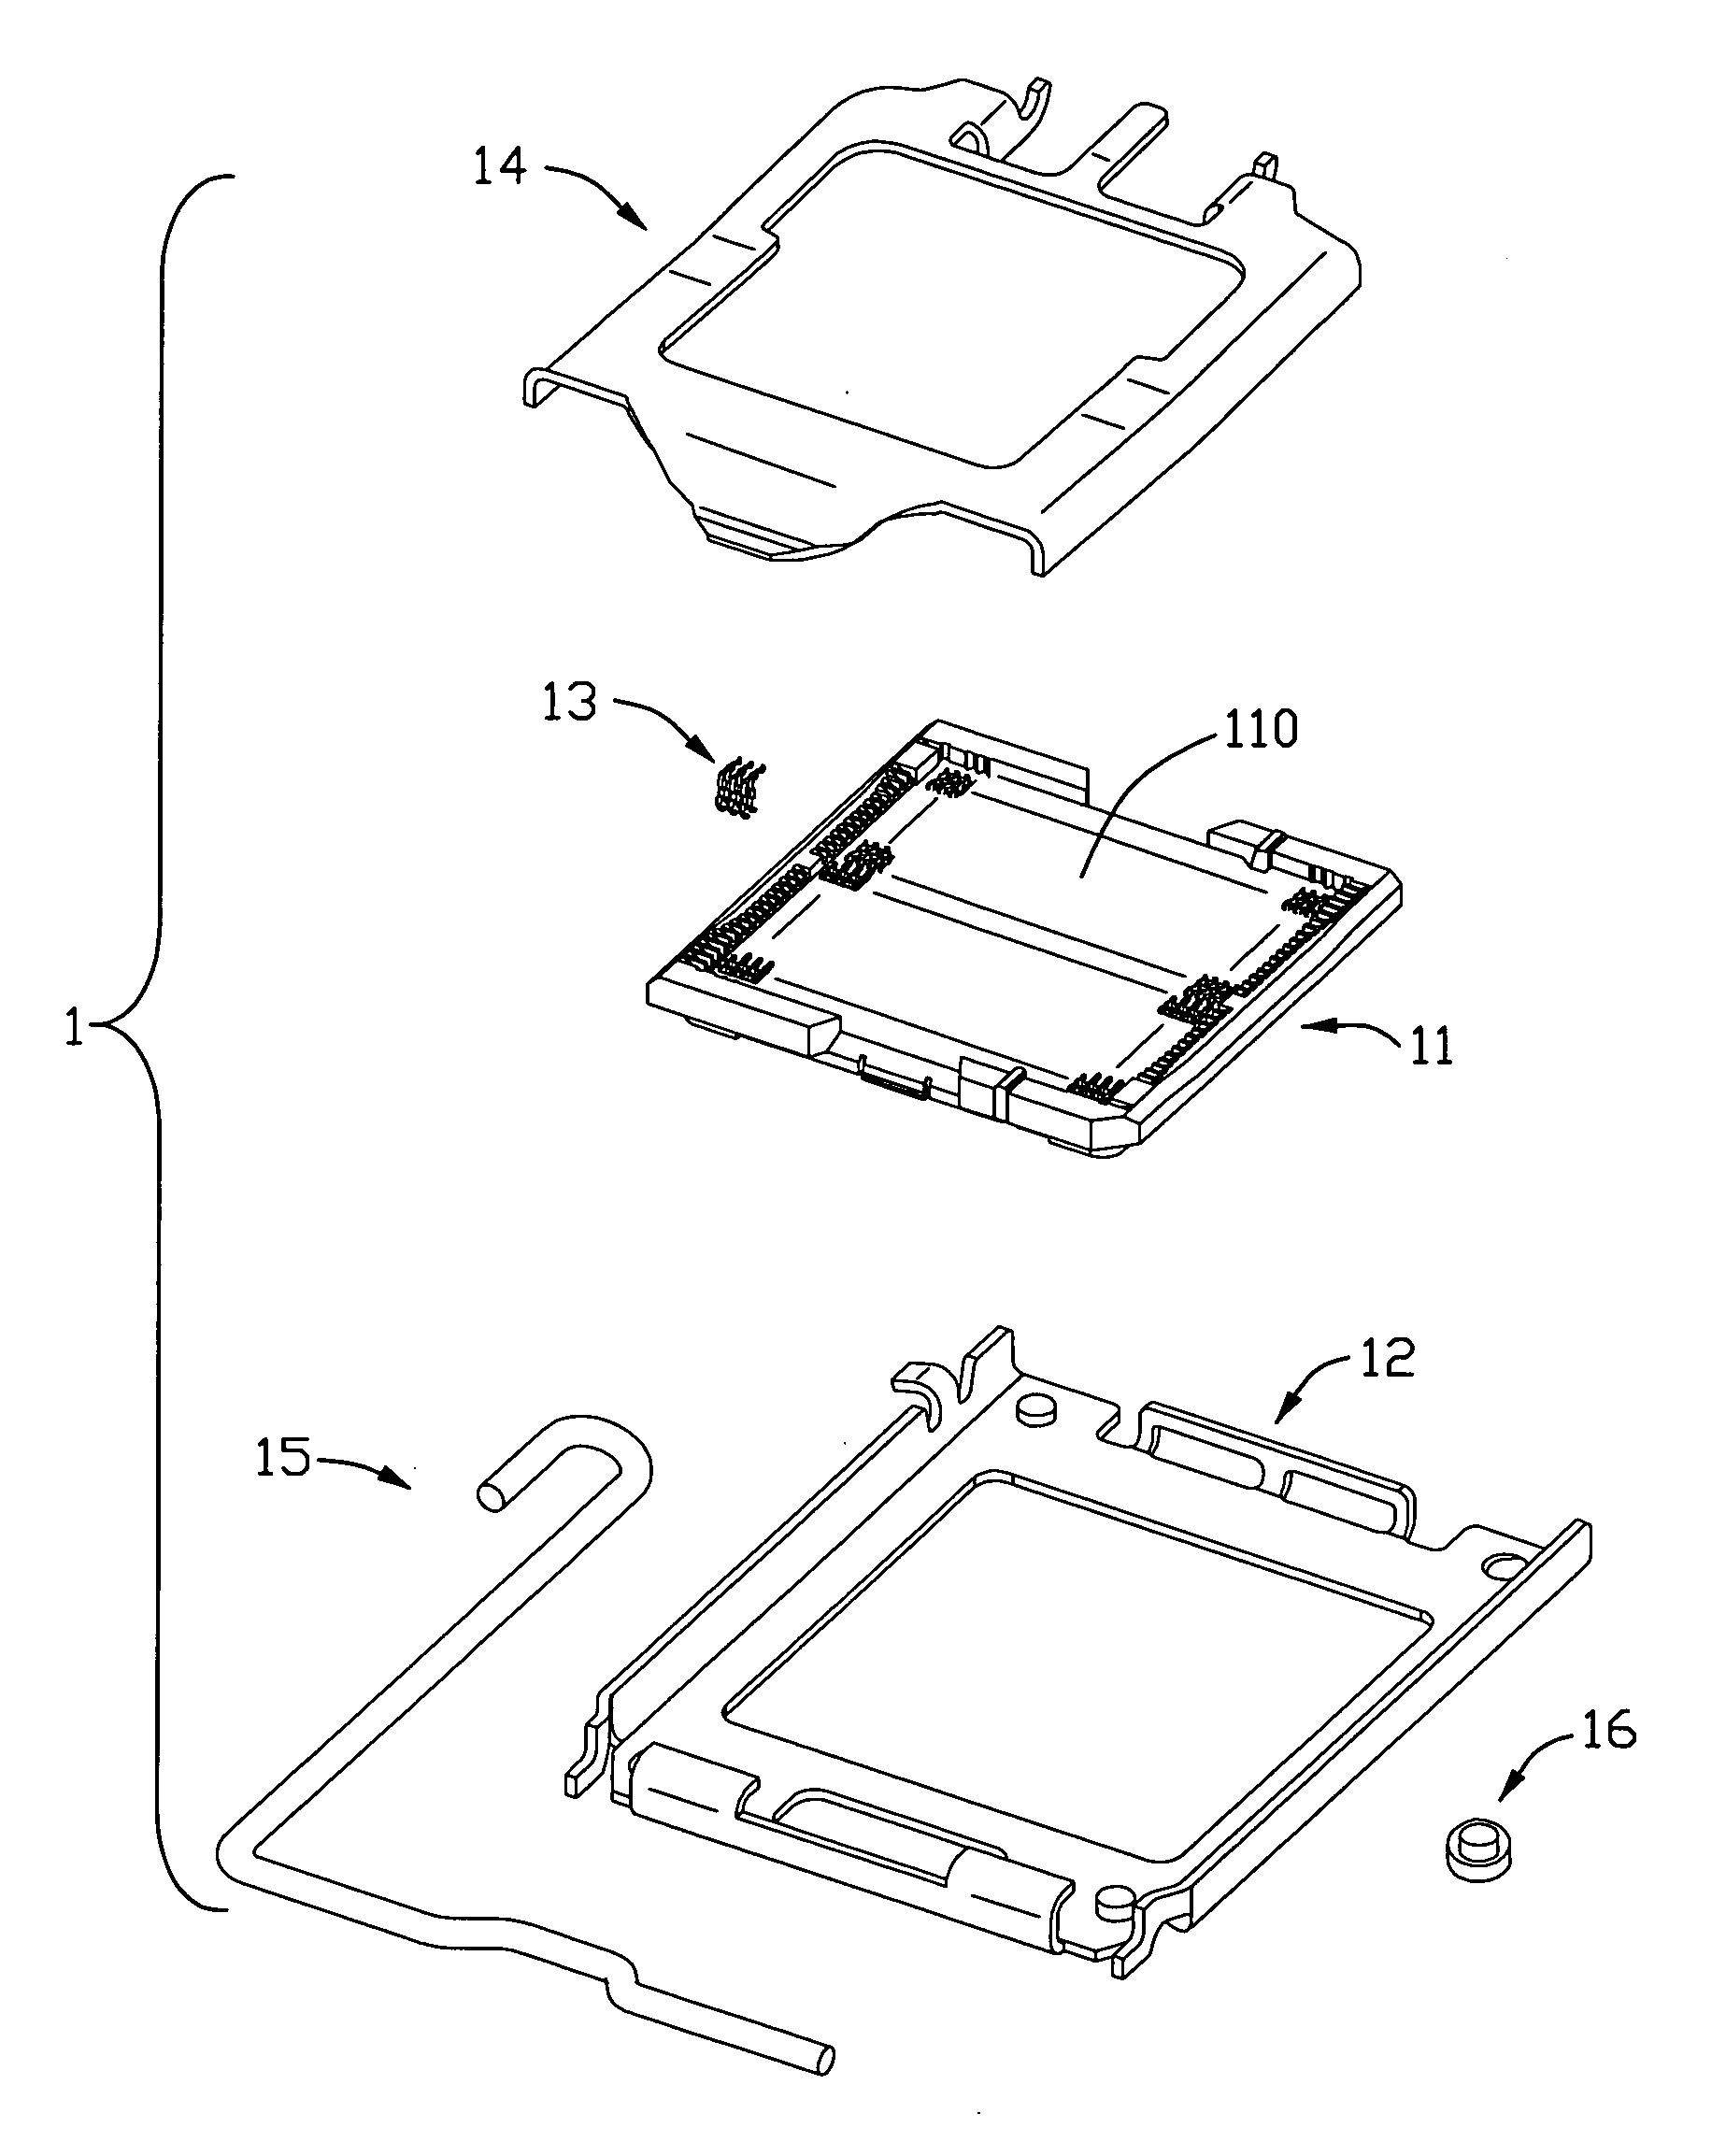 Electrical connector having stiffener fastened by groups of one-step screw post and mating sleeve